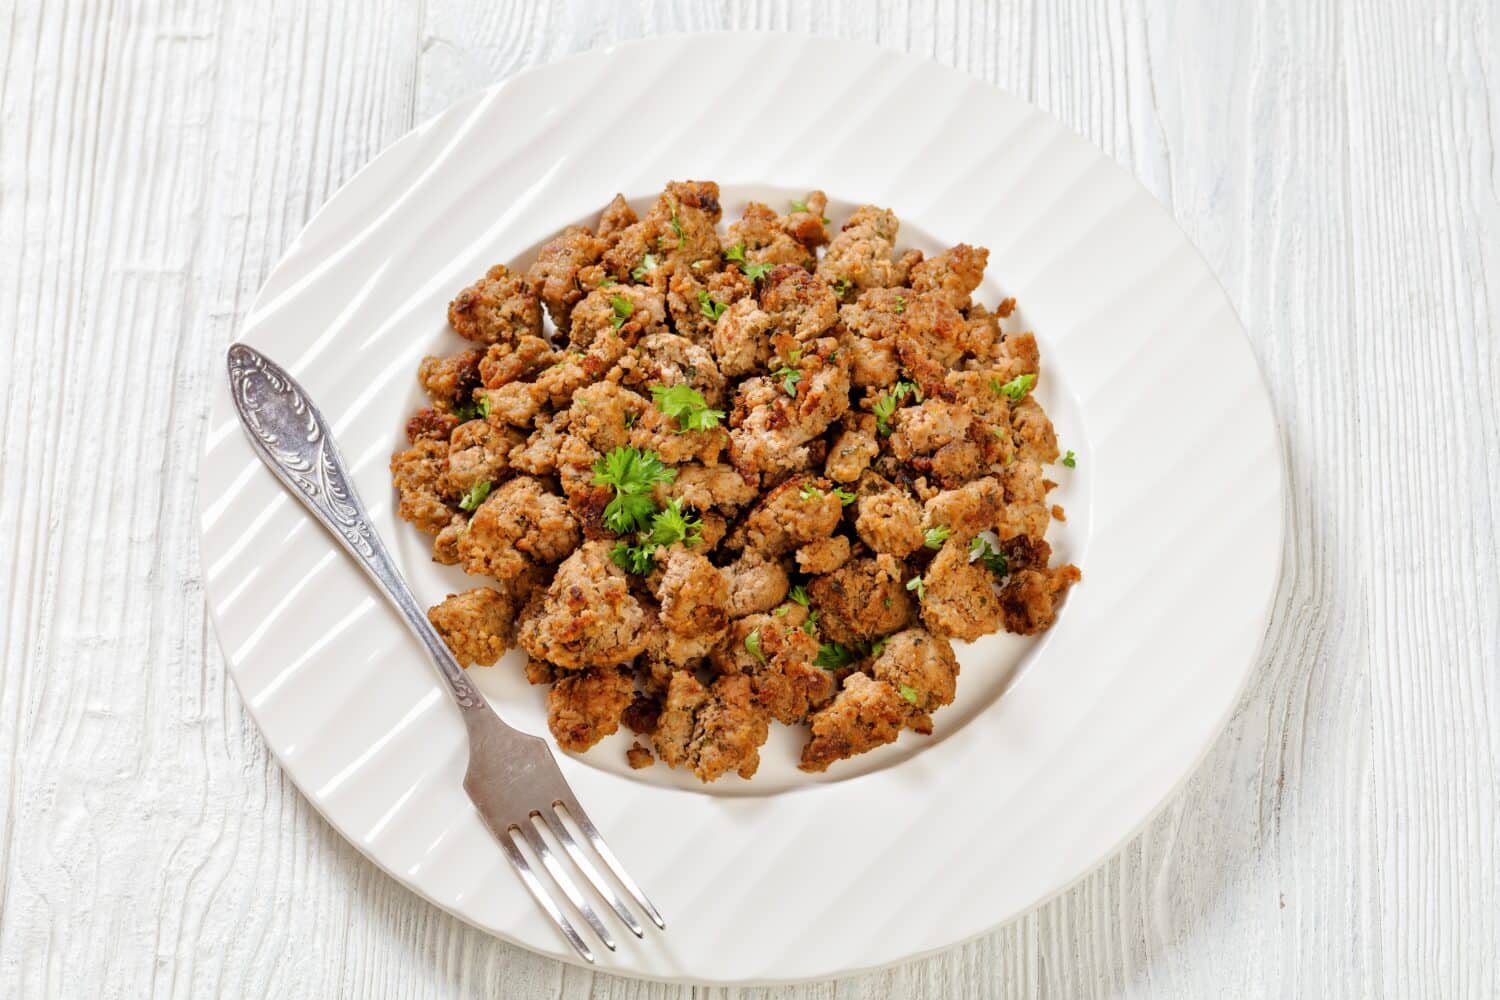 fried Italian sausage of freshly ground pork meat and spices on white plate with fork on white wooden textured table, horizontal view from above